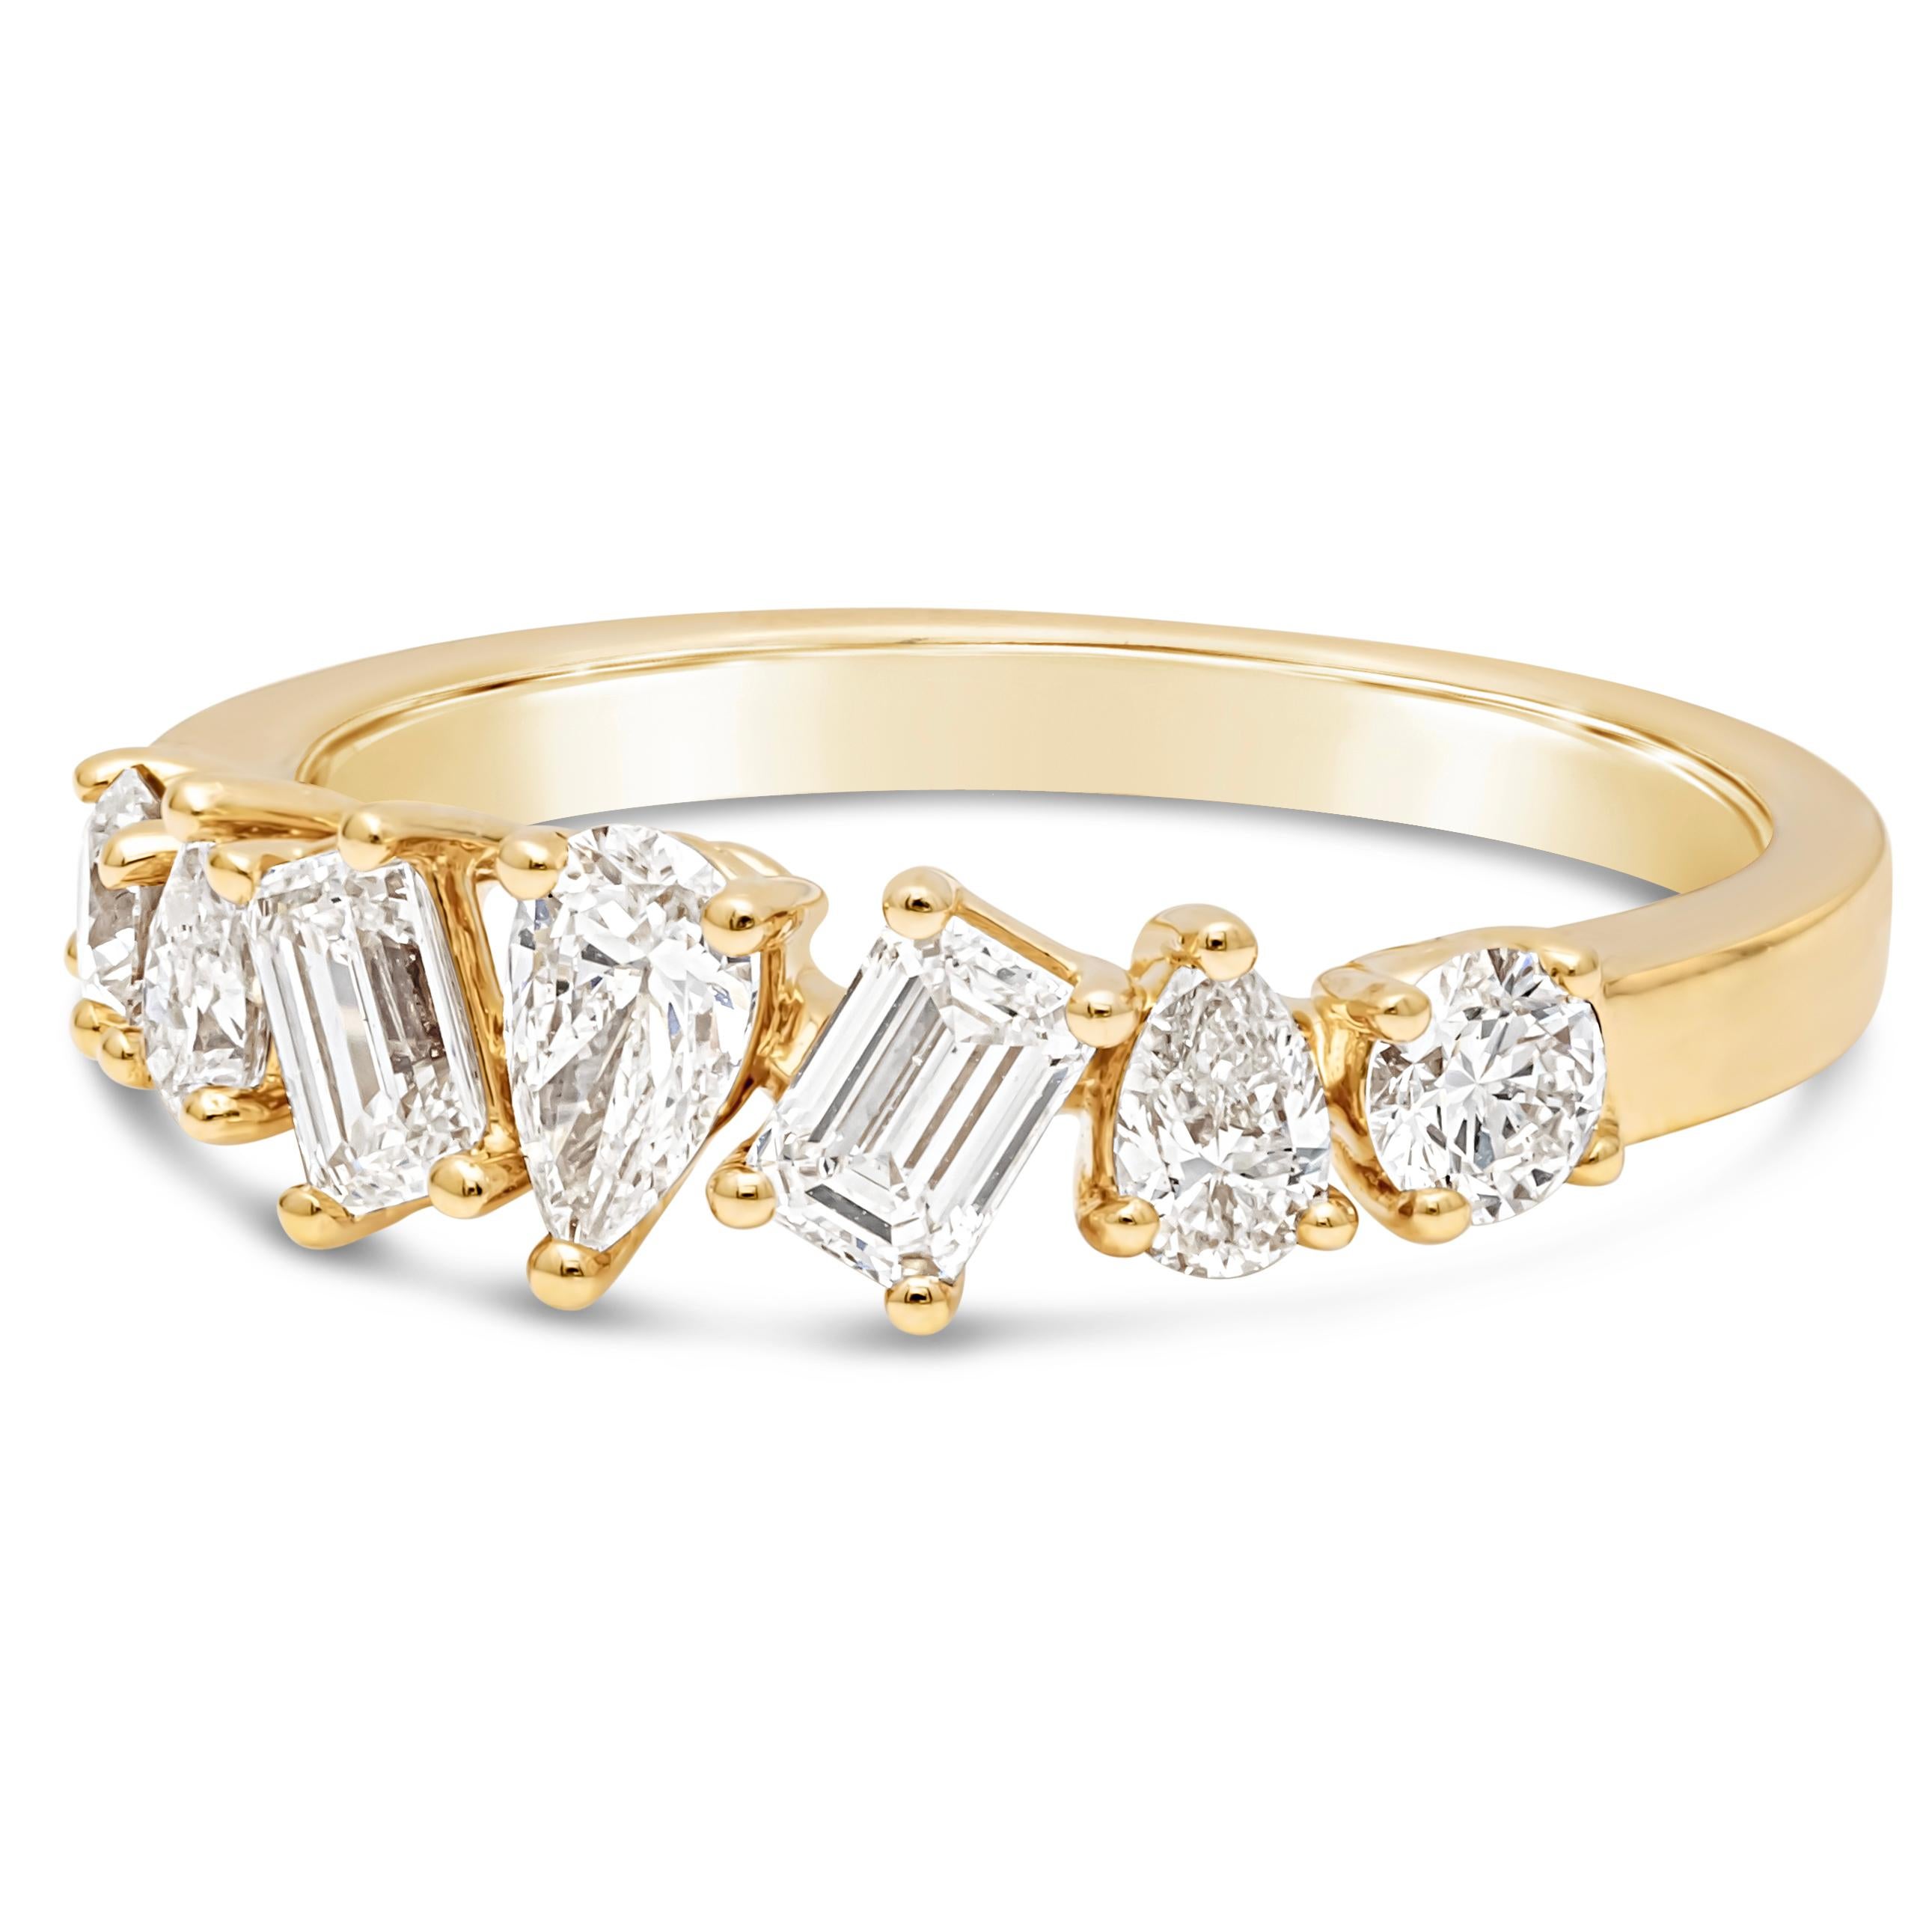 This simple and classy seven stone fashion ring showcases seven mixed cut diamonds weighing 1.04 carats total, G color and VS-SI1 in clarity. Set in a timeless prong setting and finely made in 18k yellow gold.

Style available in different price